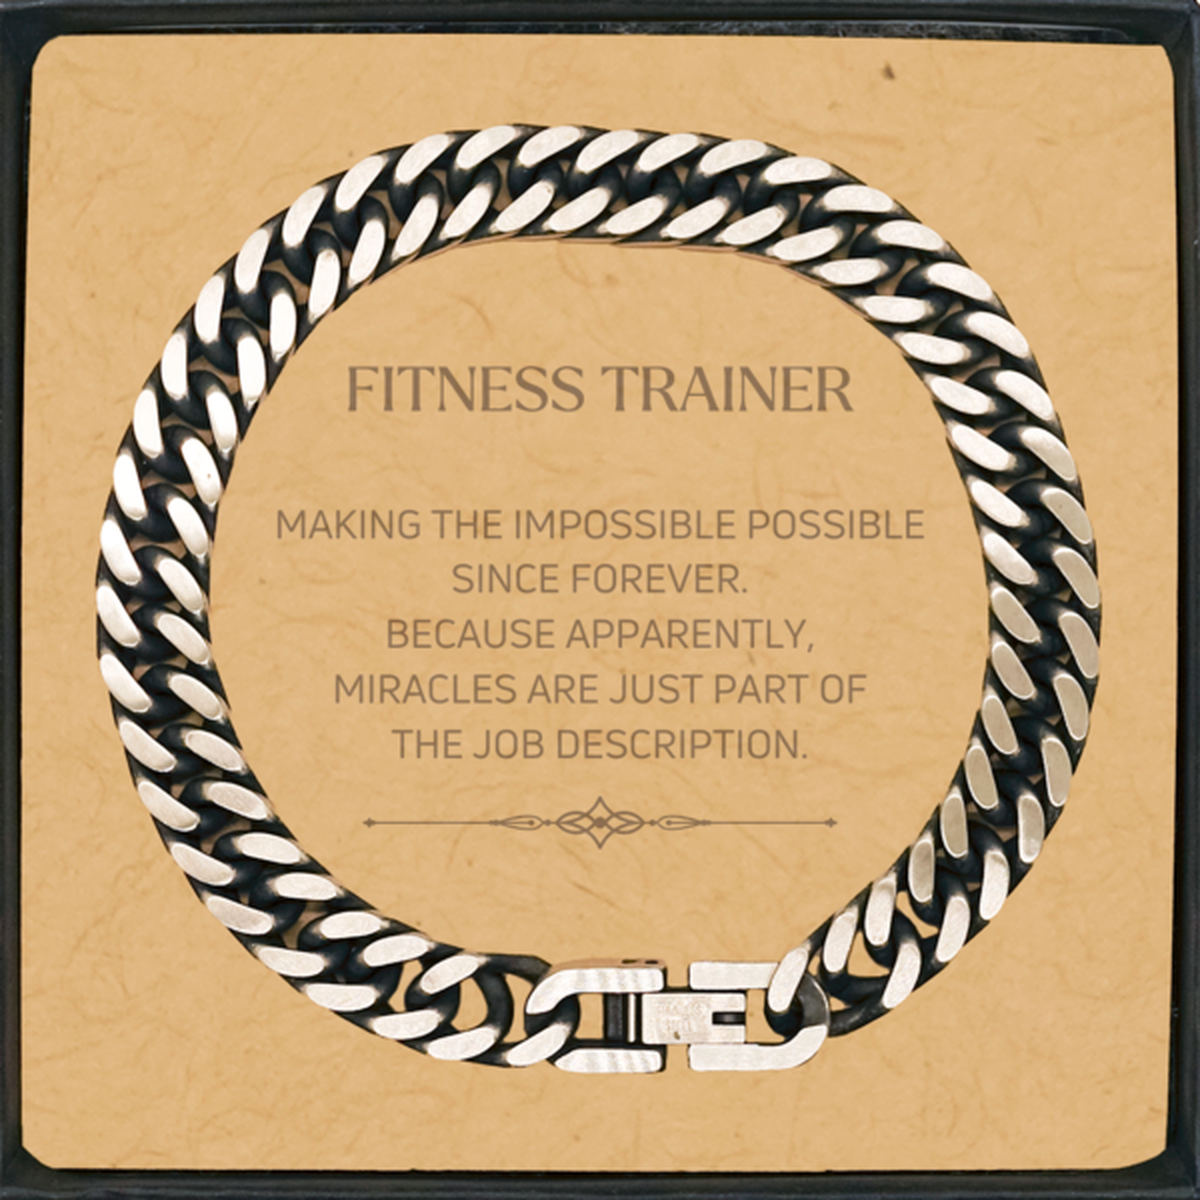 Funny Fitness Trainer Gifts, Miracles are just part of the job description, Inspirational Birthday Cuban Link Chain Bracelet For Fitness Trainer, Men, Women, Coworkers, Friends, Boss